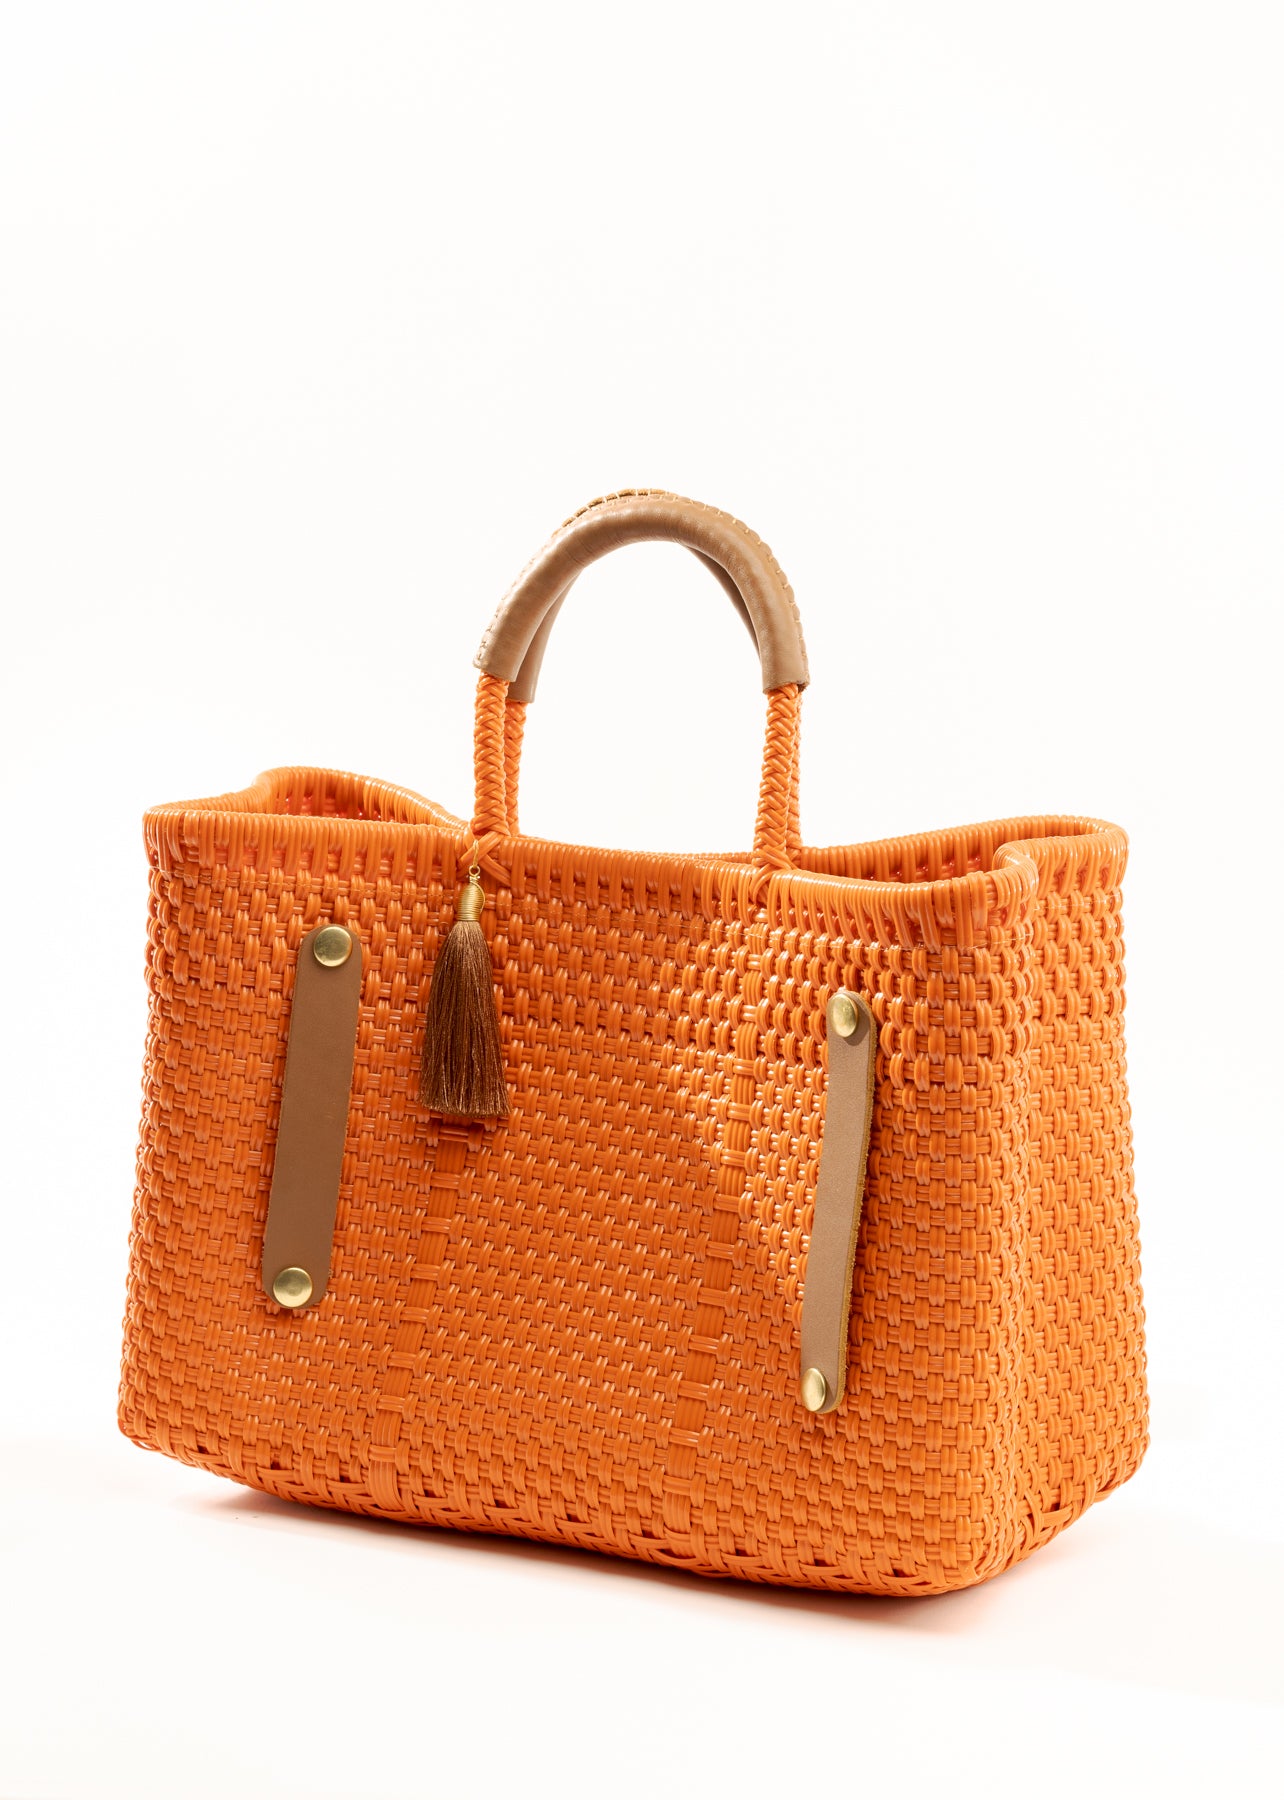 Side angle showing orange woven handbag with tan leather handle, closure straps, and tassel